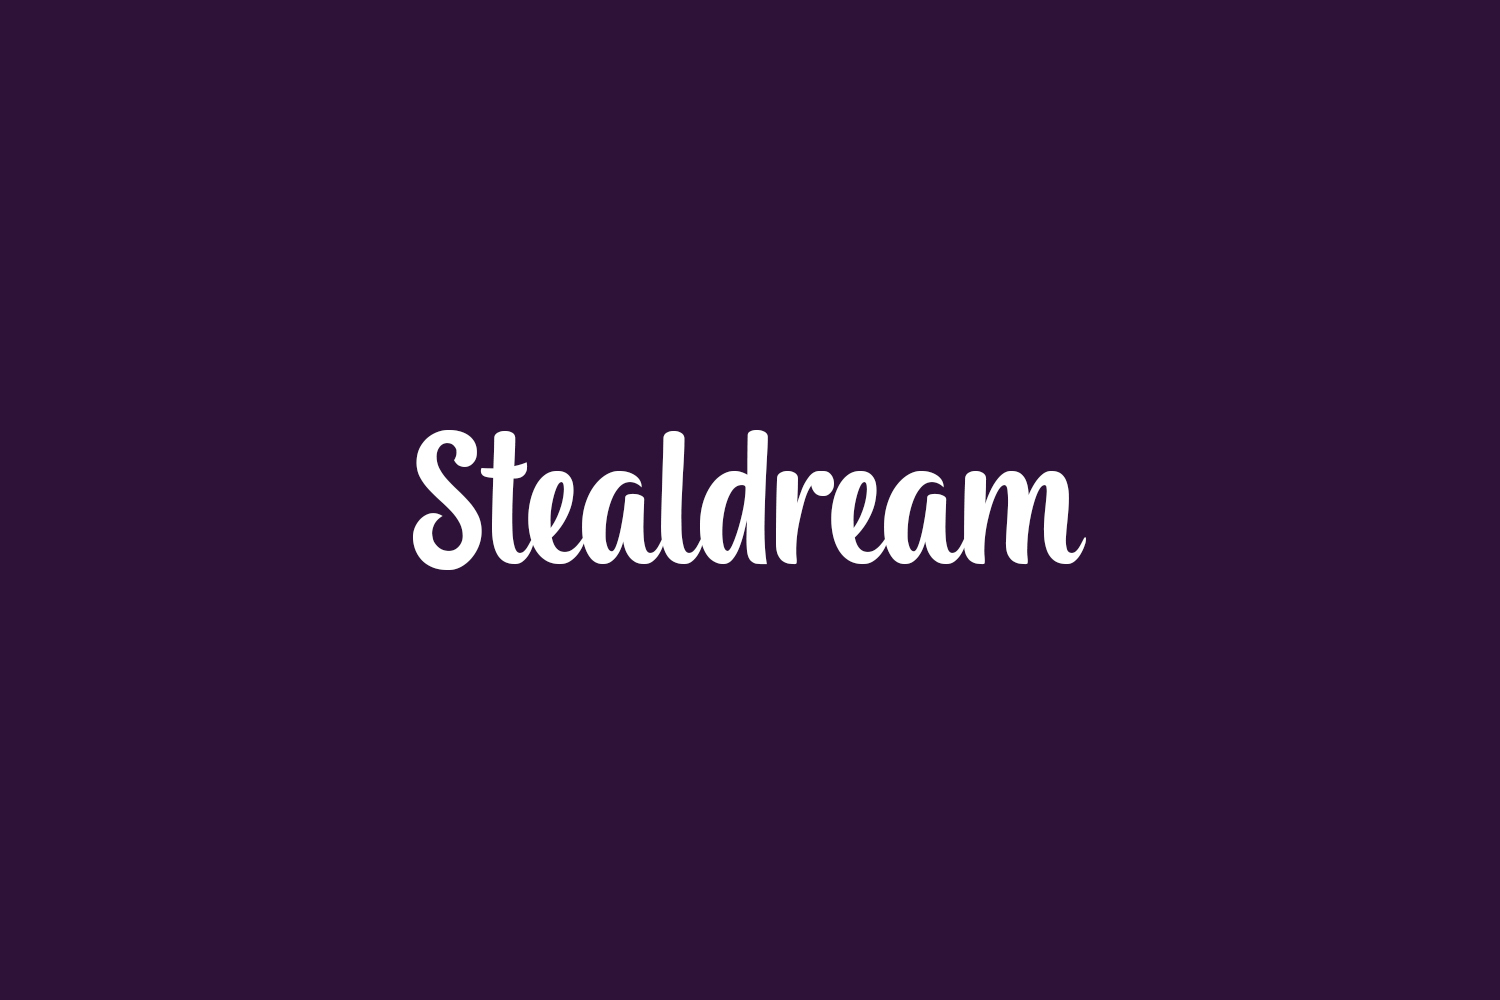 Stealdream Free Font